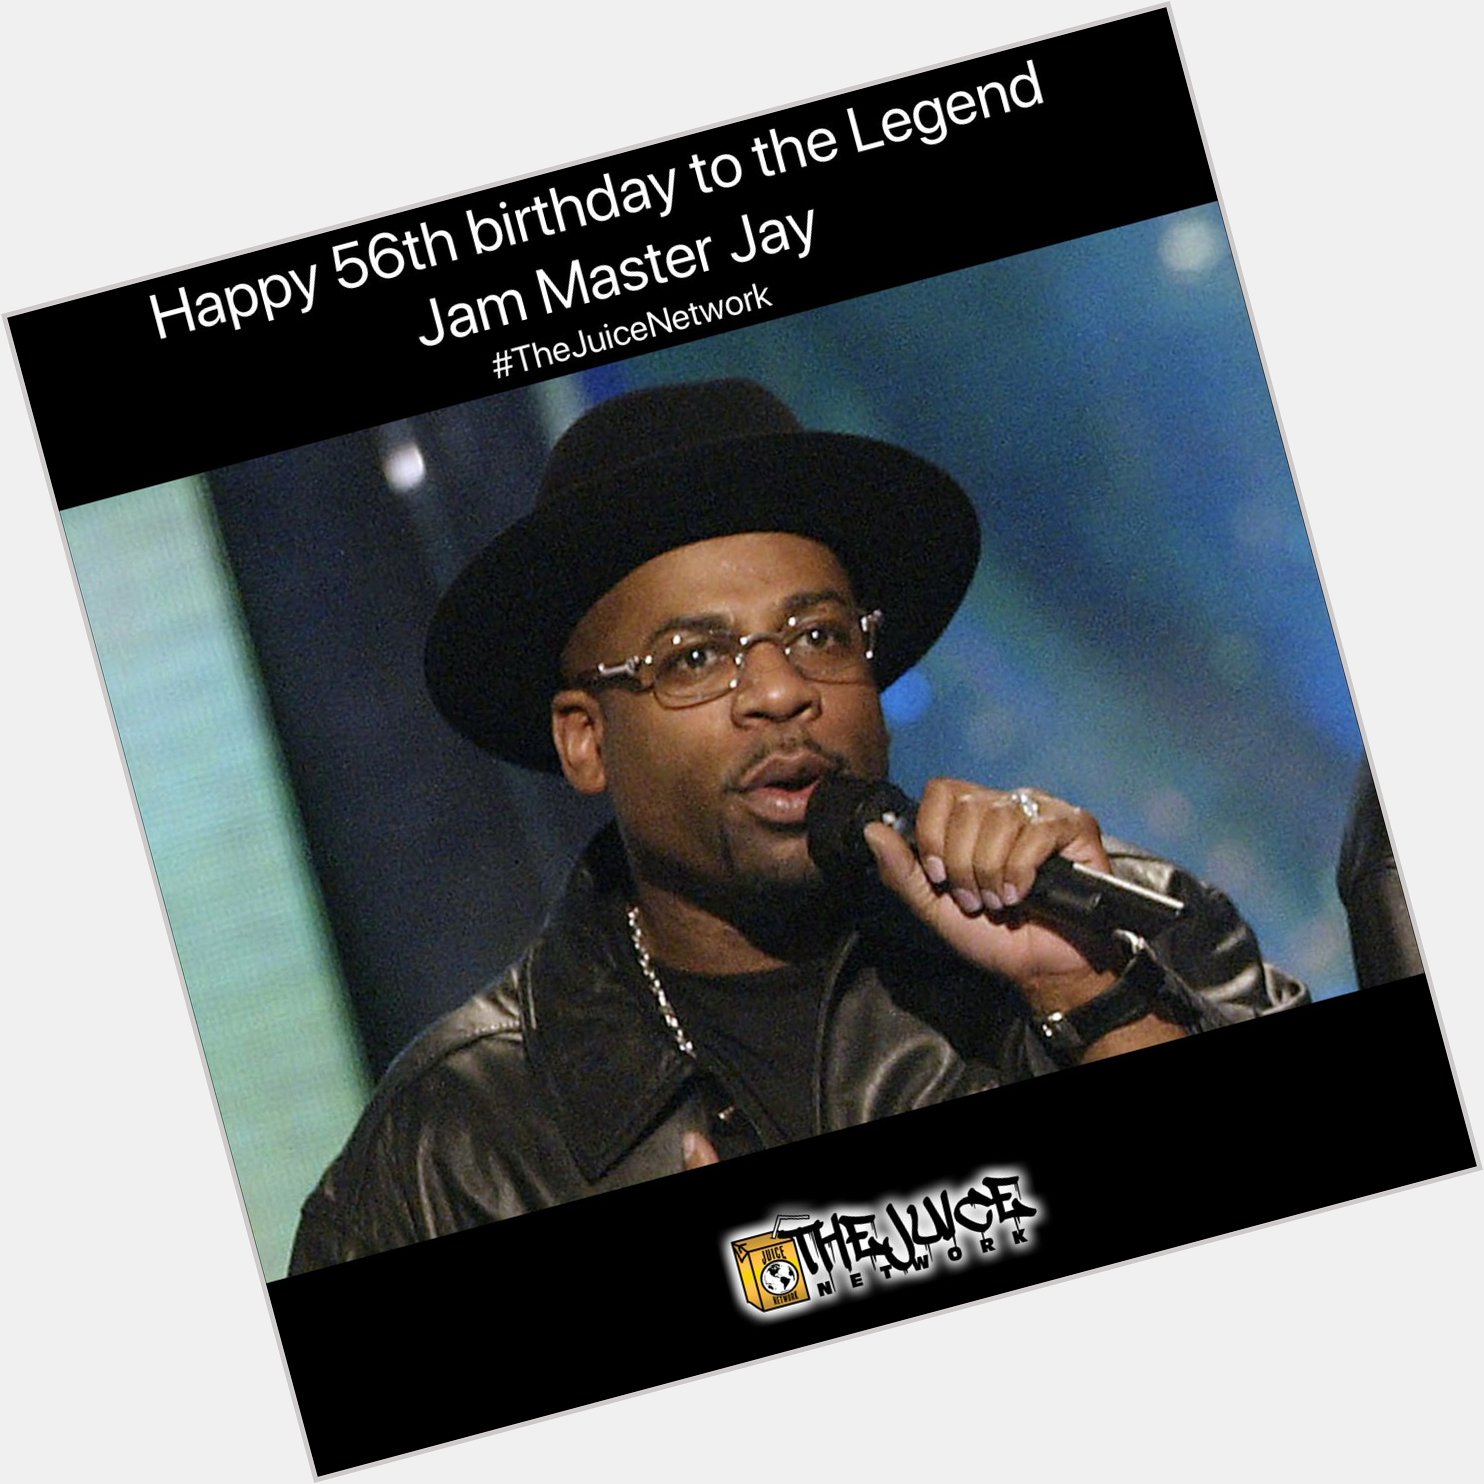 Happy 56th birthday to the Legend Jam Master Jay! Rest In Peace       